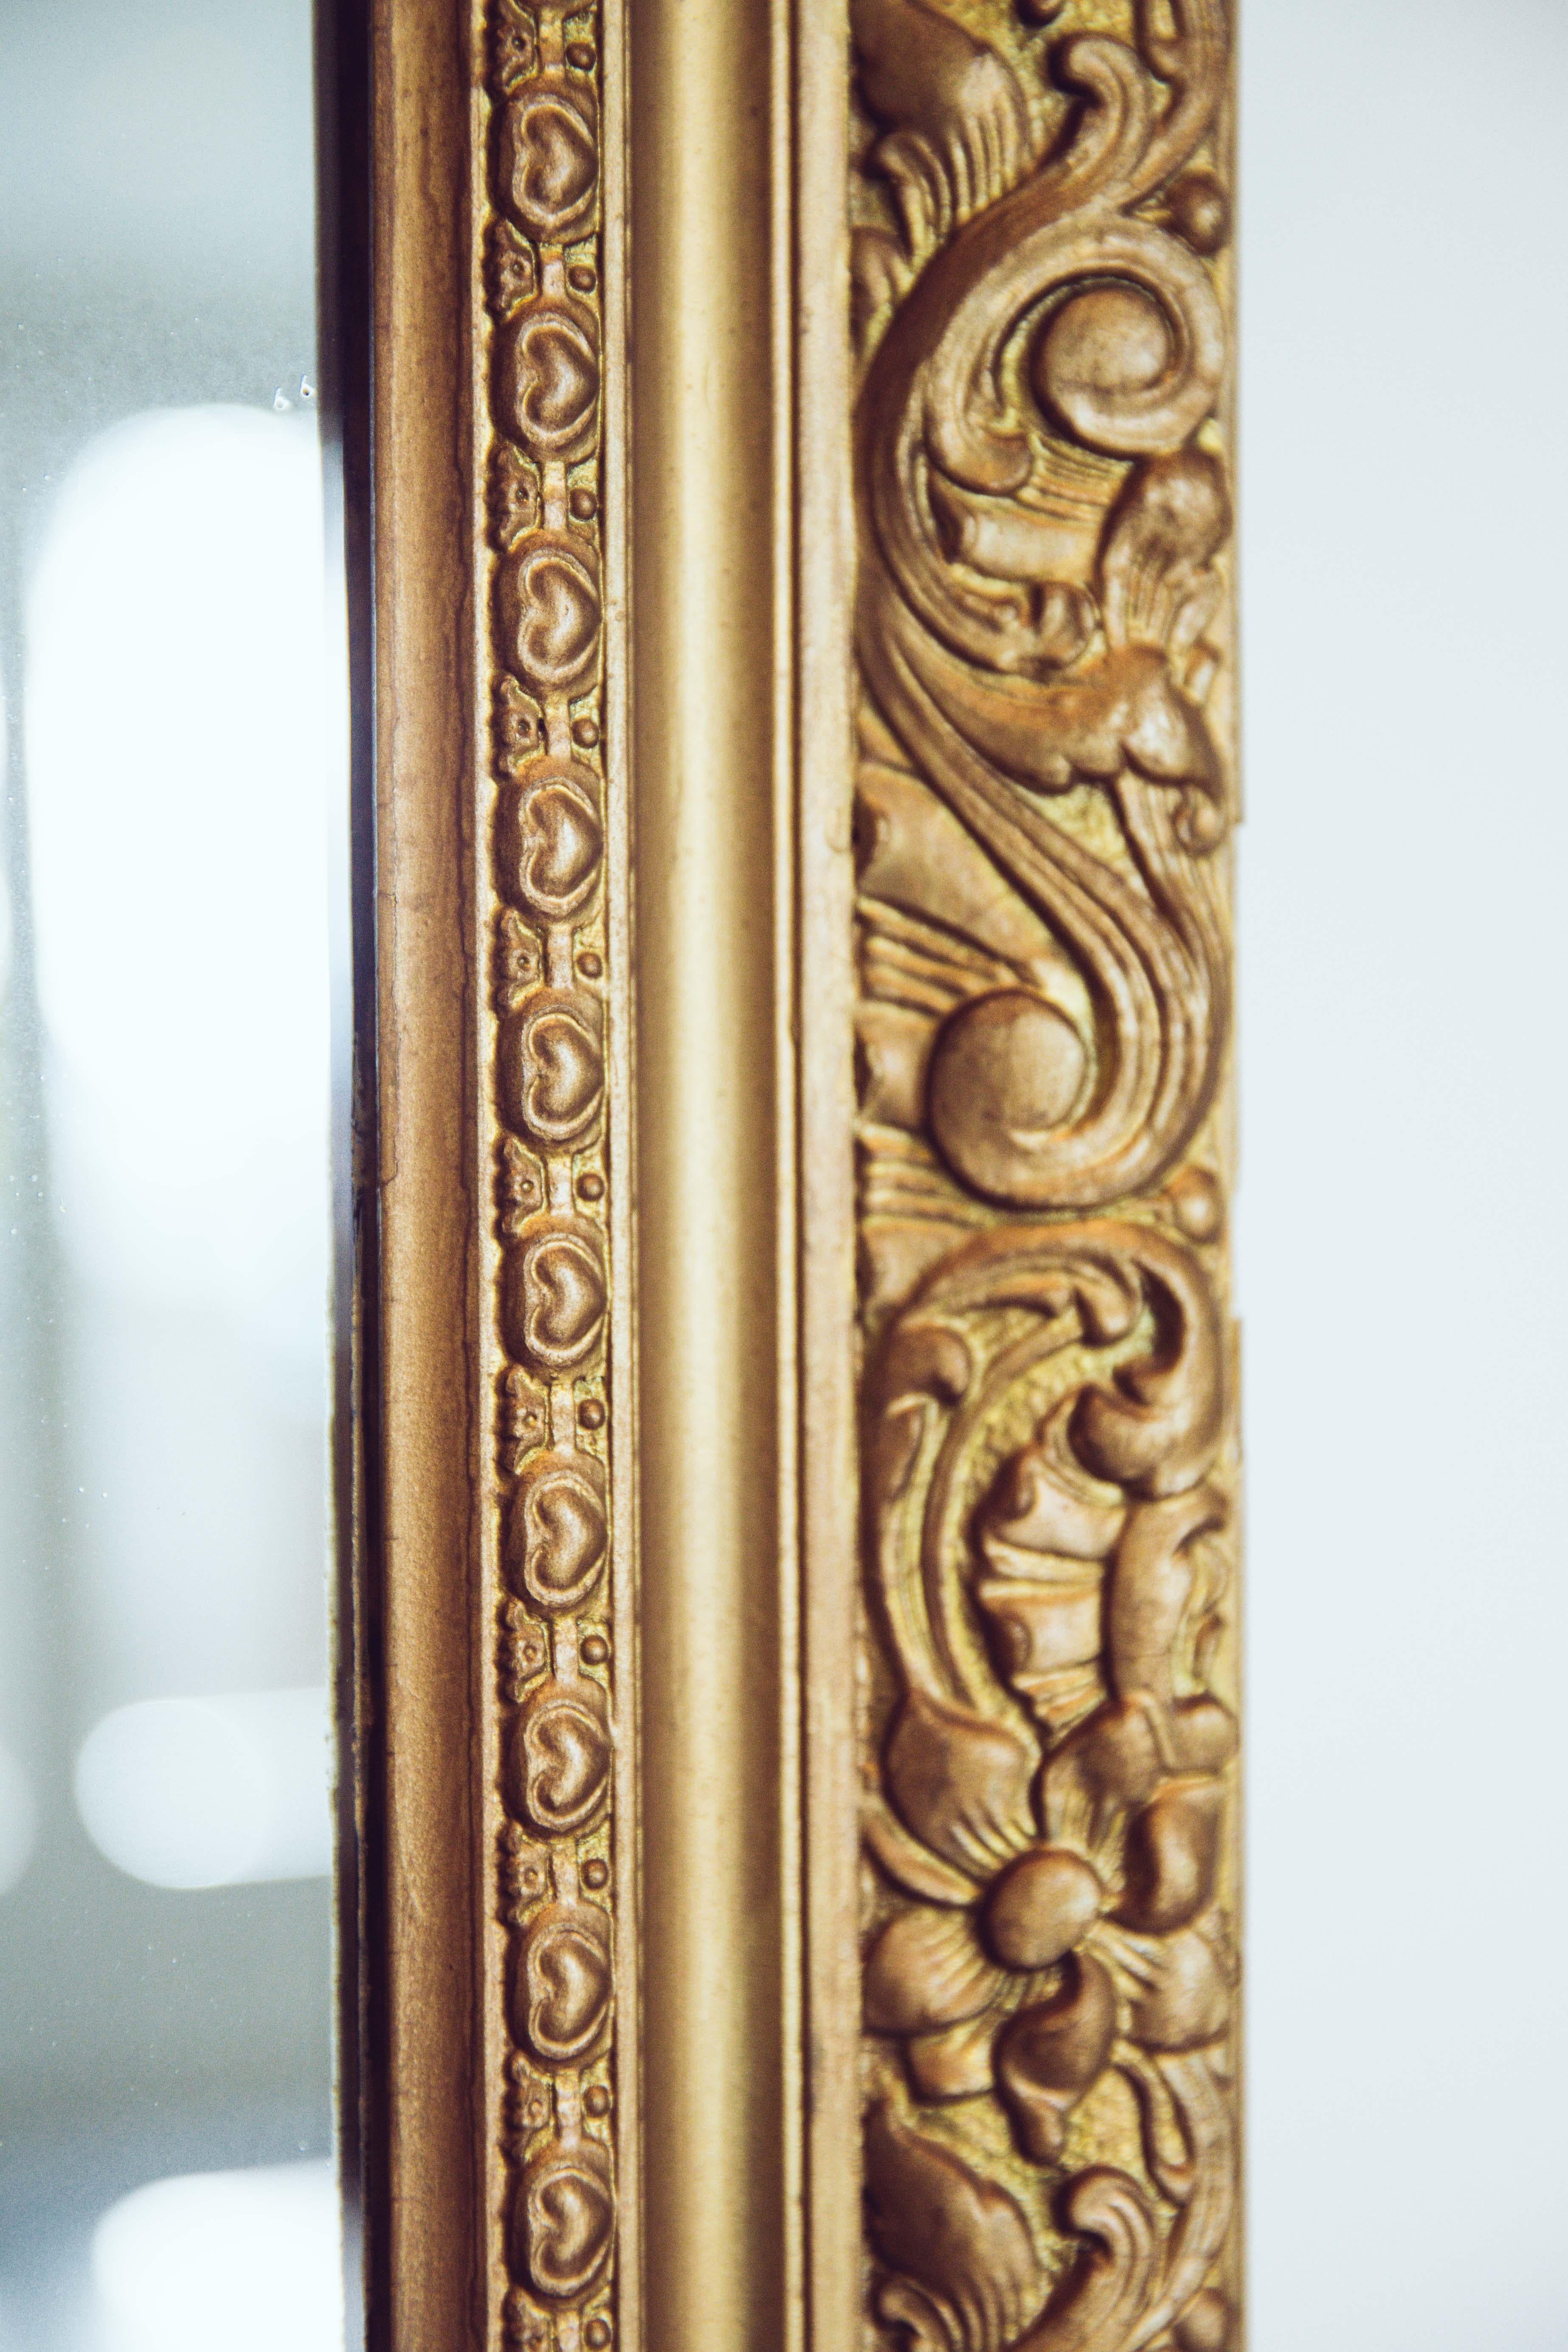 Plaster 19th Century French Carved Gilded Wood Mirror with Urn Motif Crest For Sale